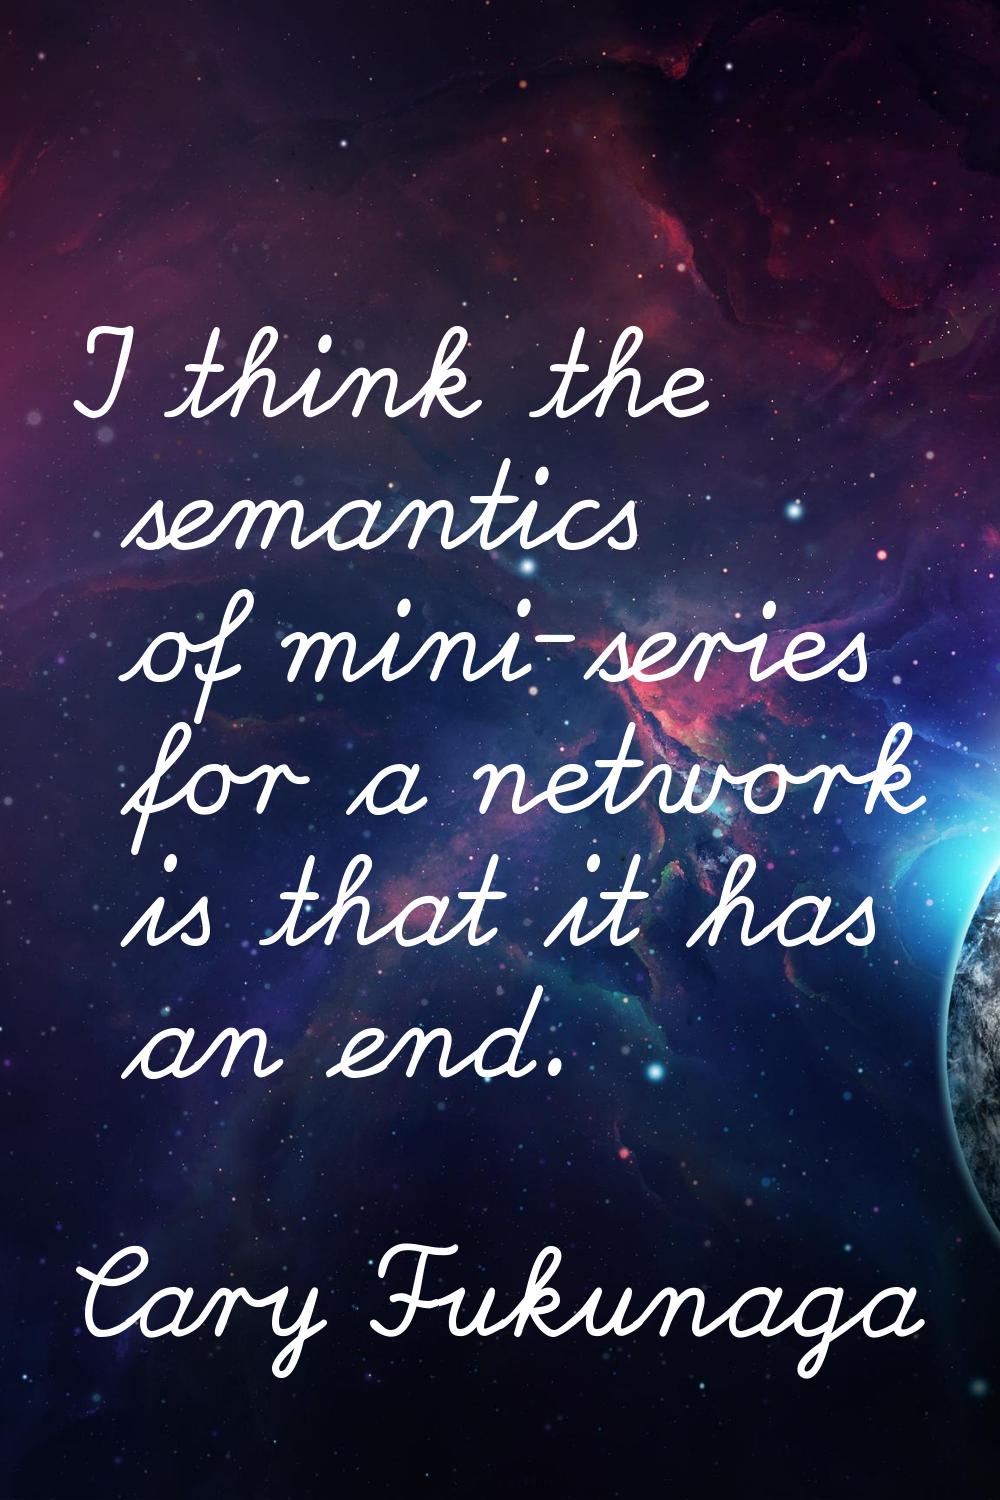 I think the semantics of mini-series for a network is that it has an end.